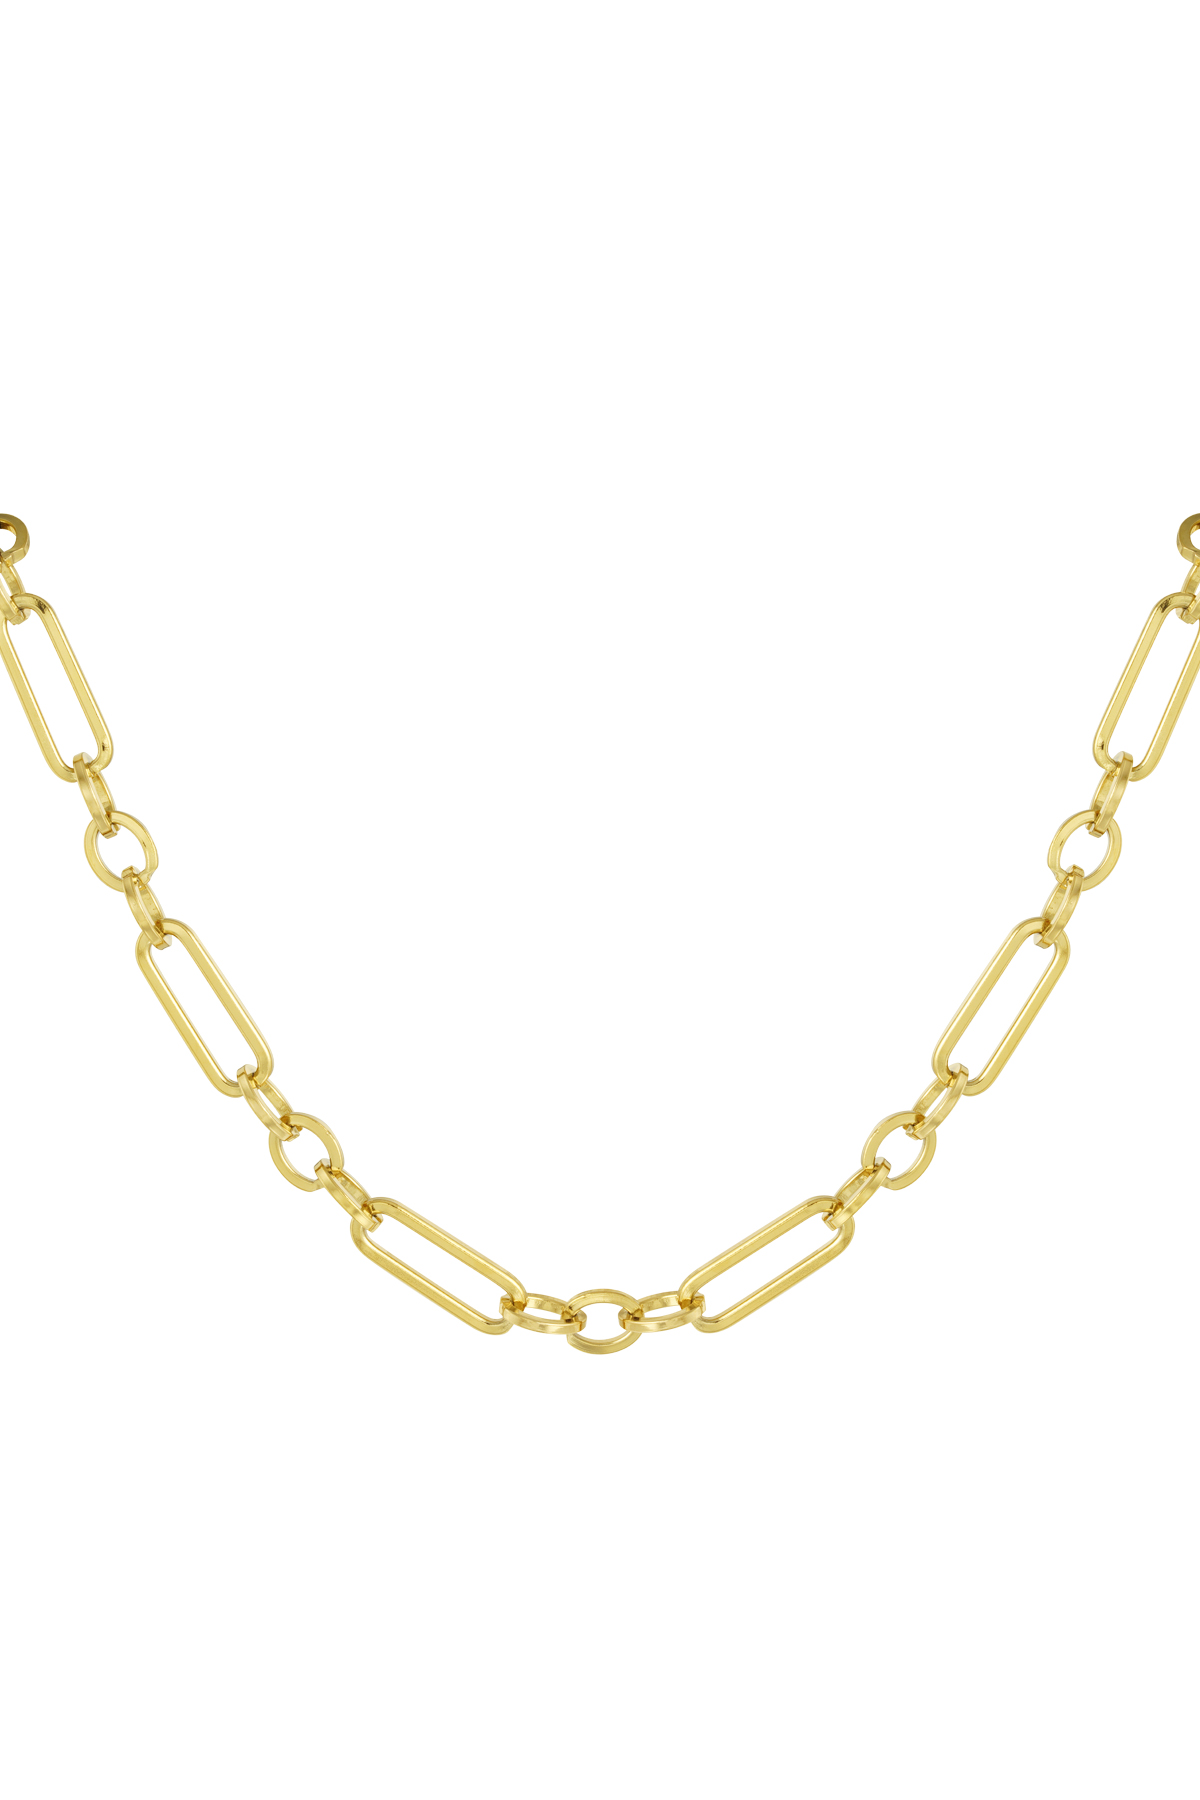 Chain elongated links - gold 